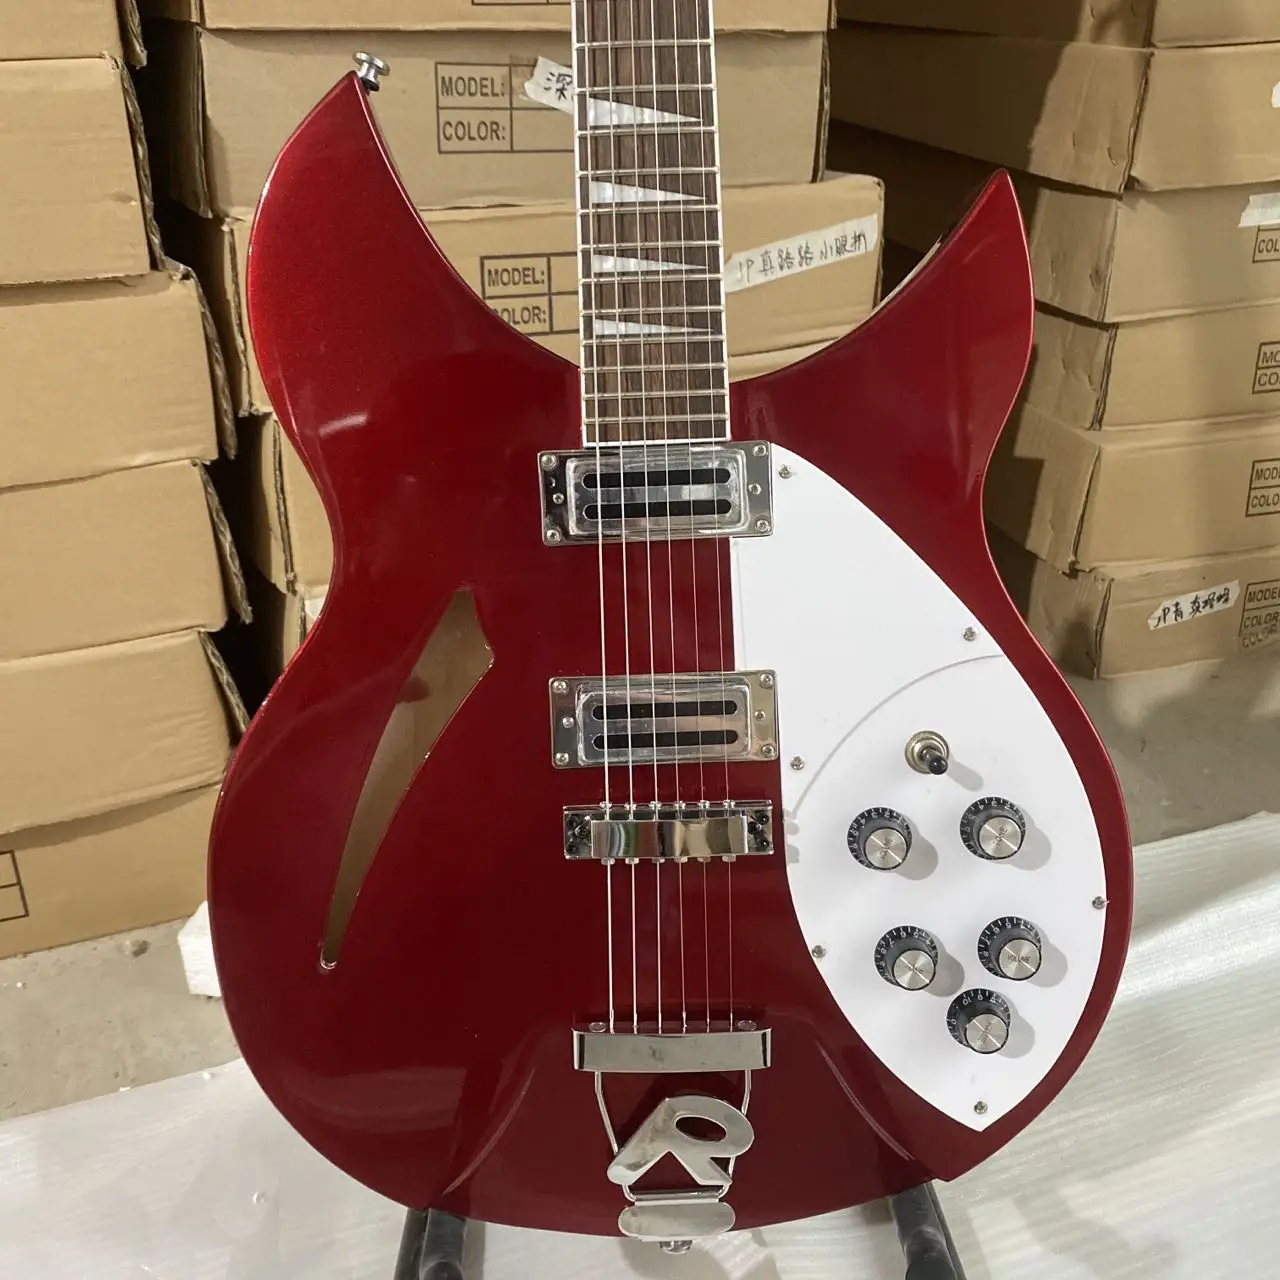 Milepæl Trofast fokus Rickenback 330 Electric Guitar Metal Red Color Semi Hollow Body Rosewood  Fingerboard High Quality Guitarra Free Shipping